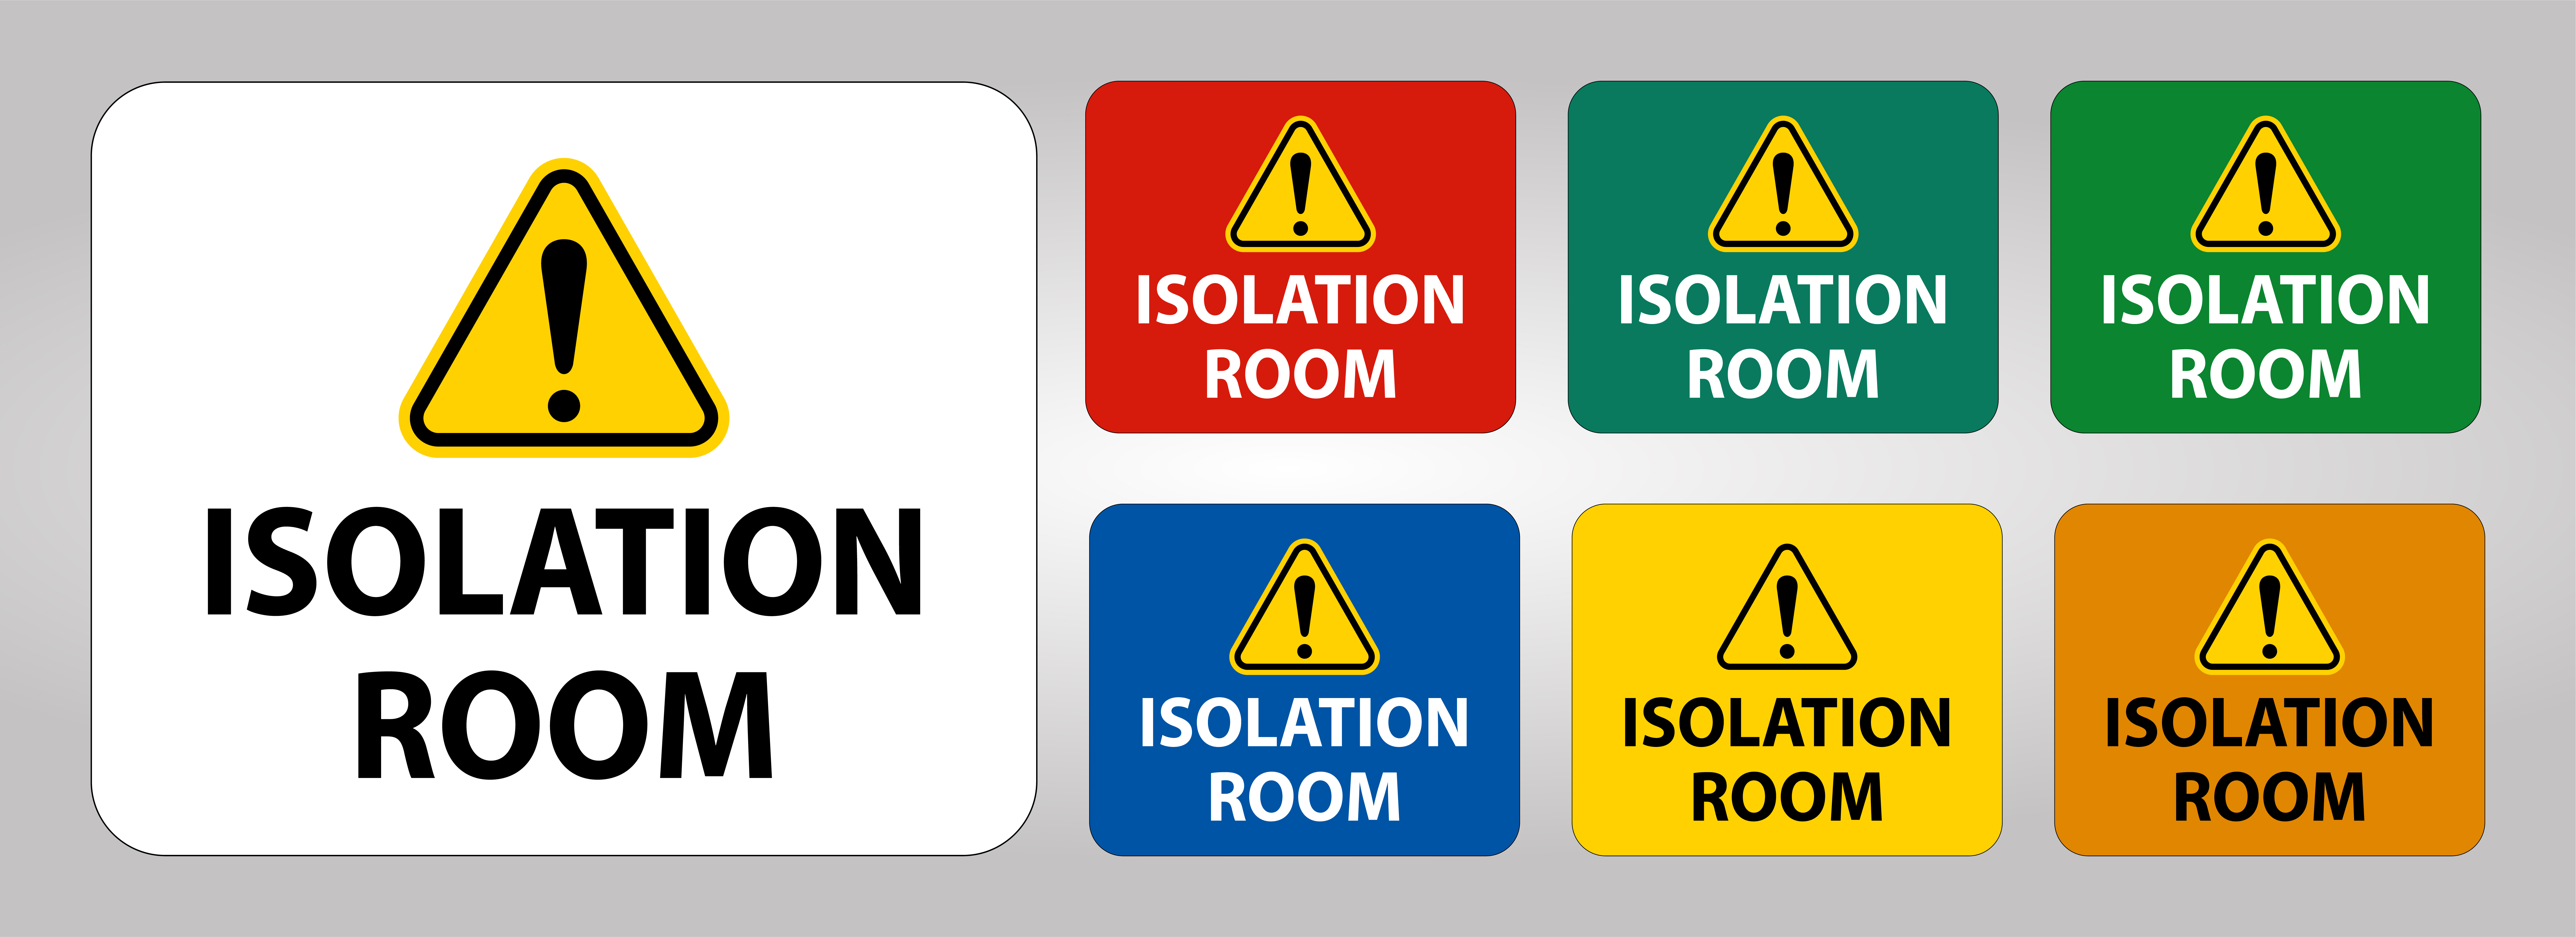 isolation-room-sign-set-1178916-vector-art-at-vecteezy